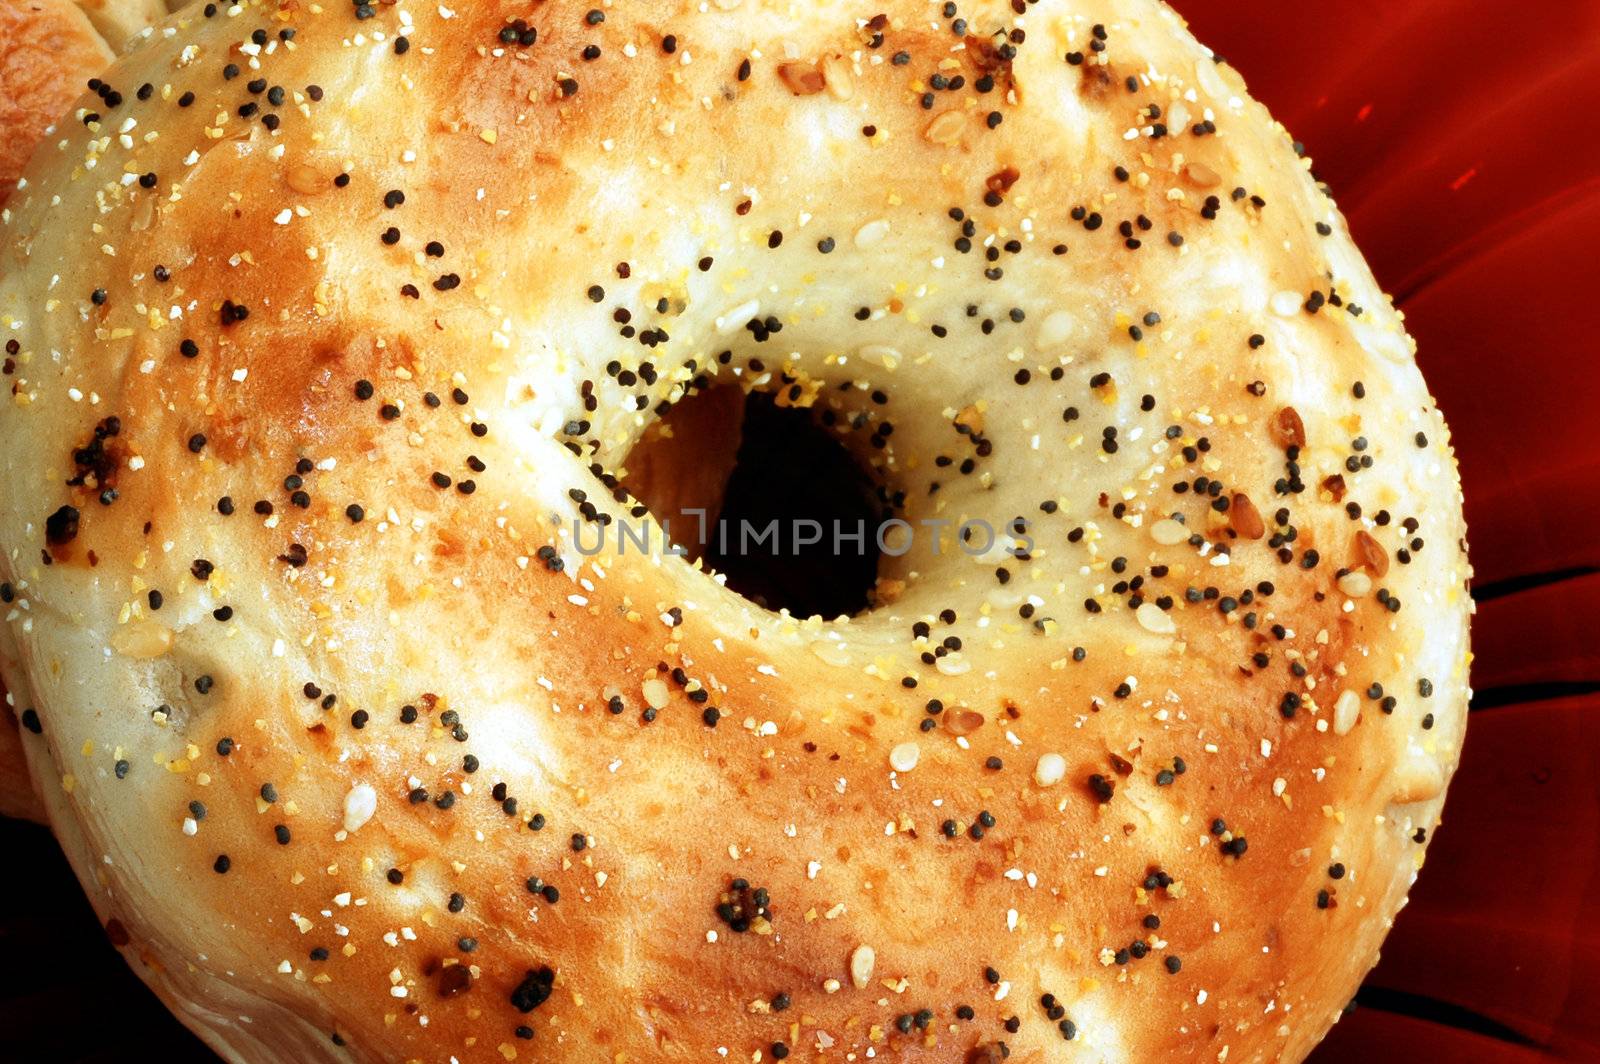 Bagel with poppy seeds by Geoarts